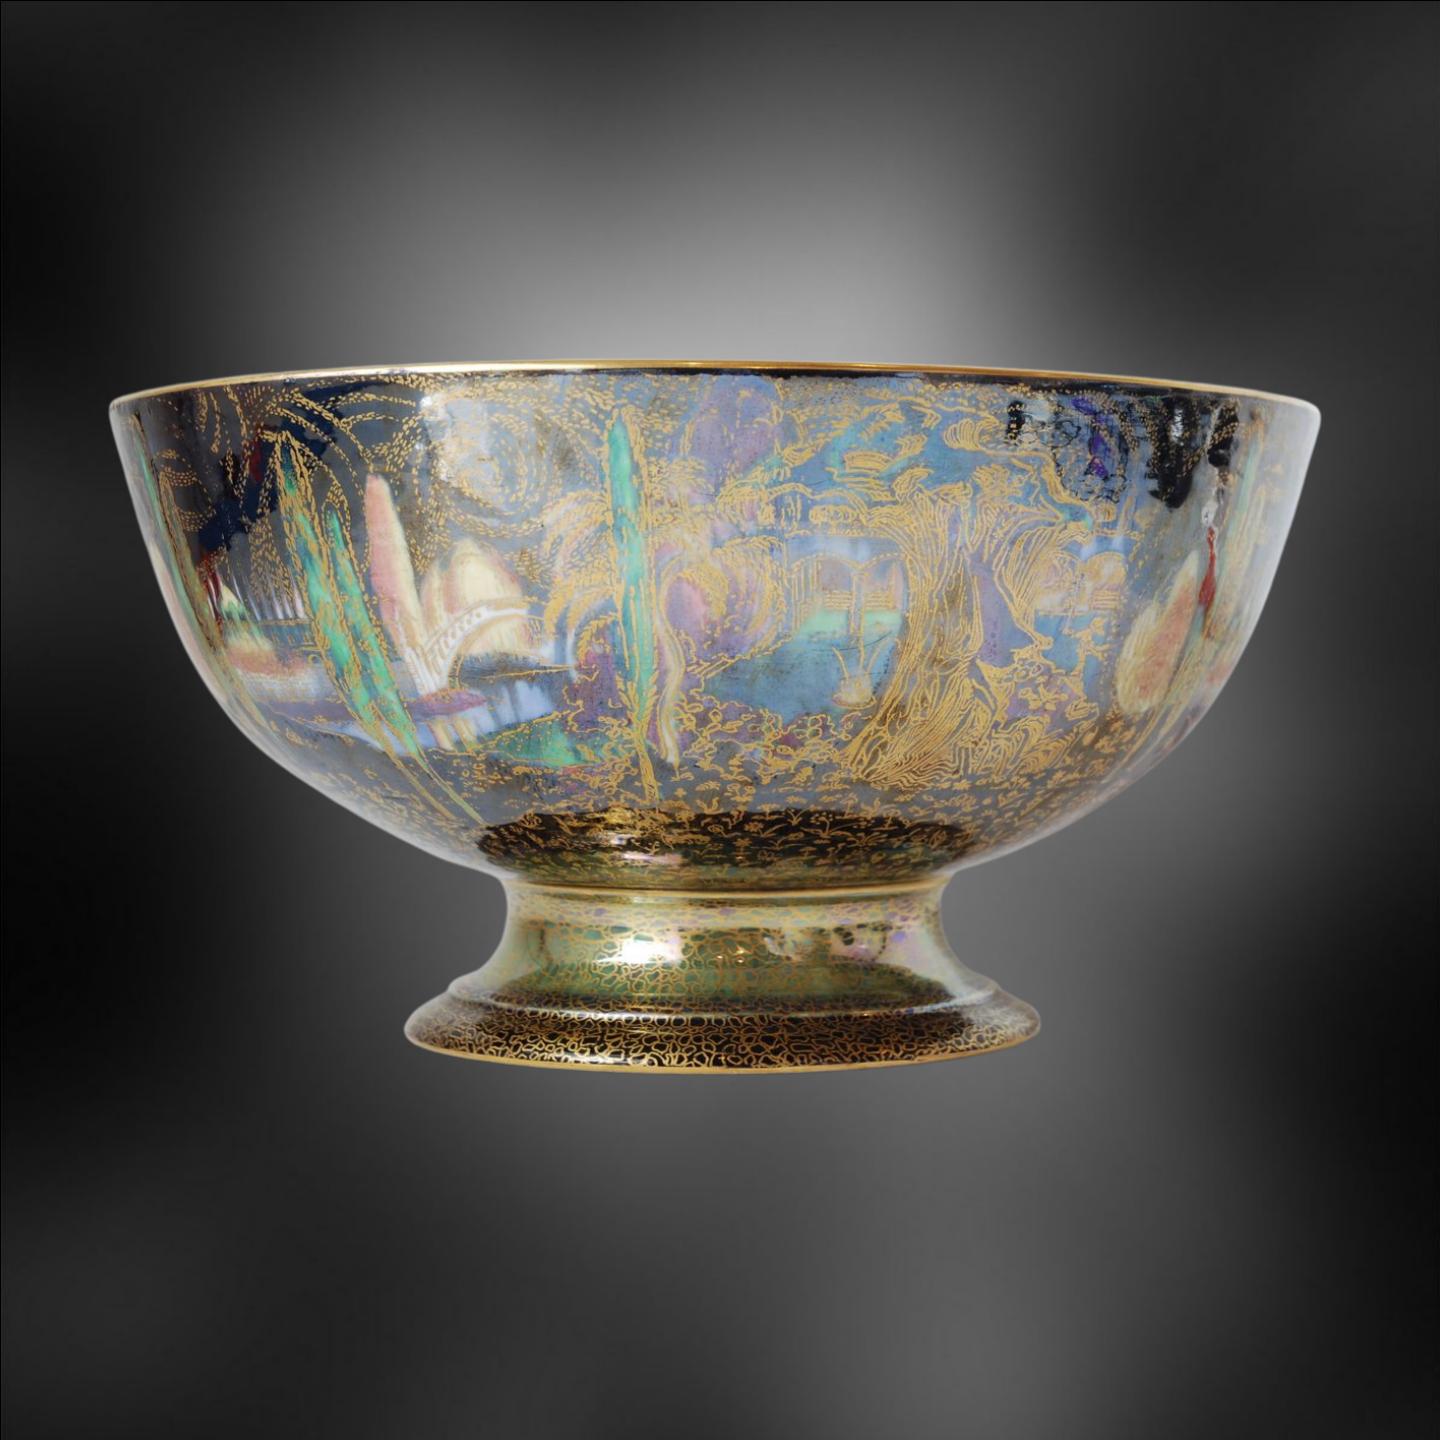 An extraordinary example of Fairyland Lustre, in the form of a punch bowl, decorated with Poplar Trees and Woodland Bridge patterns. A substantial and impressive piece, in unusually good condition.

Signed MJ for Makeig-Jones. The monogram is